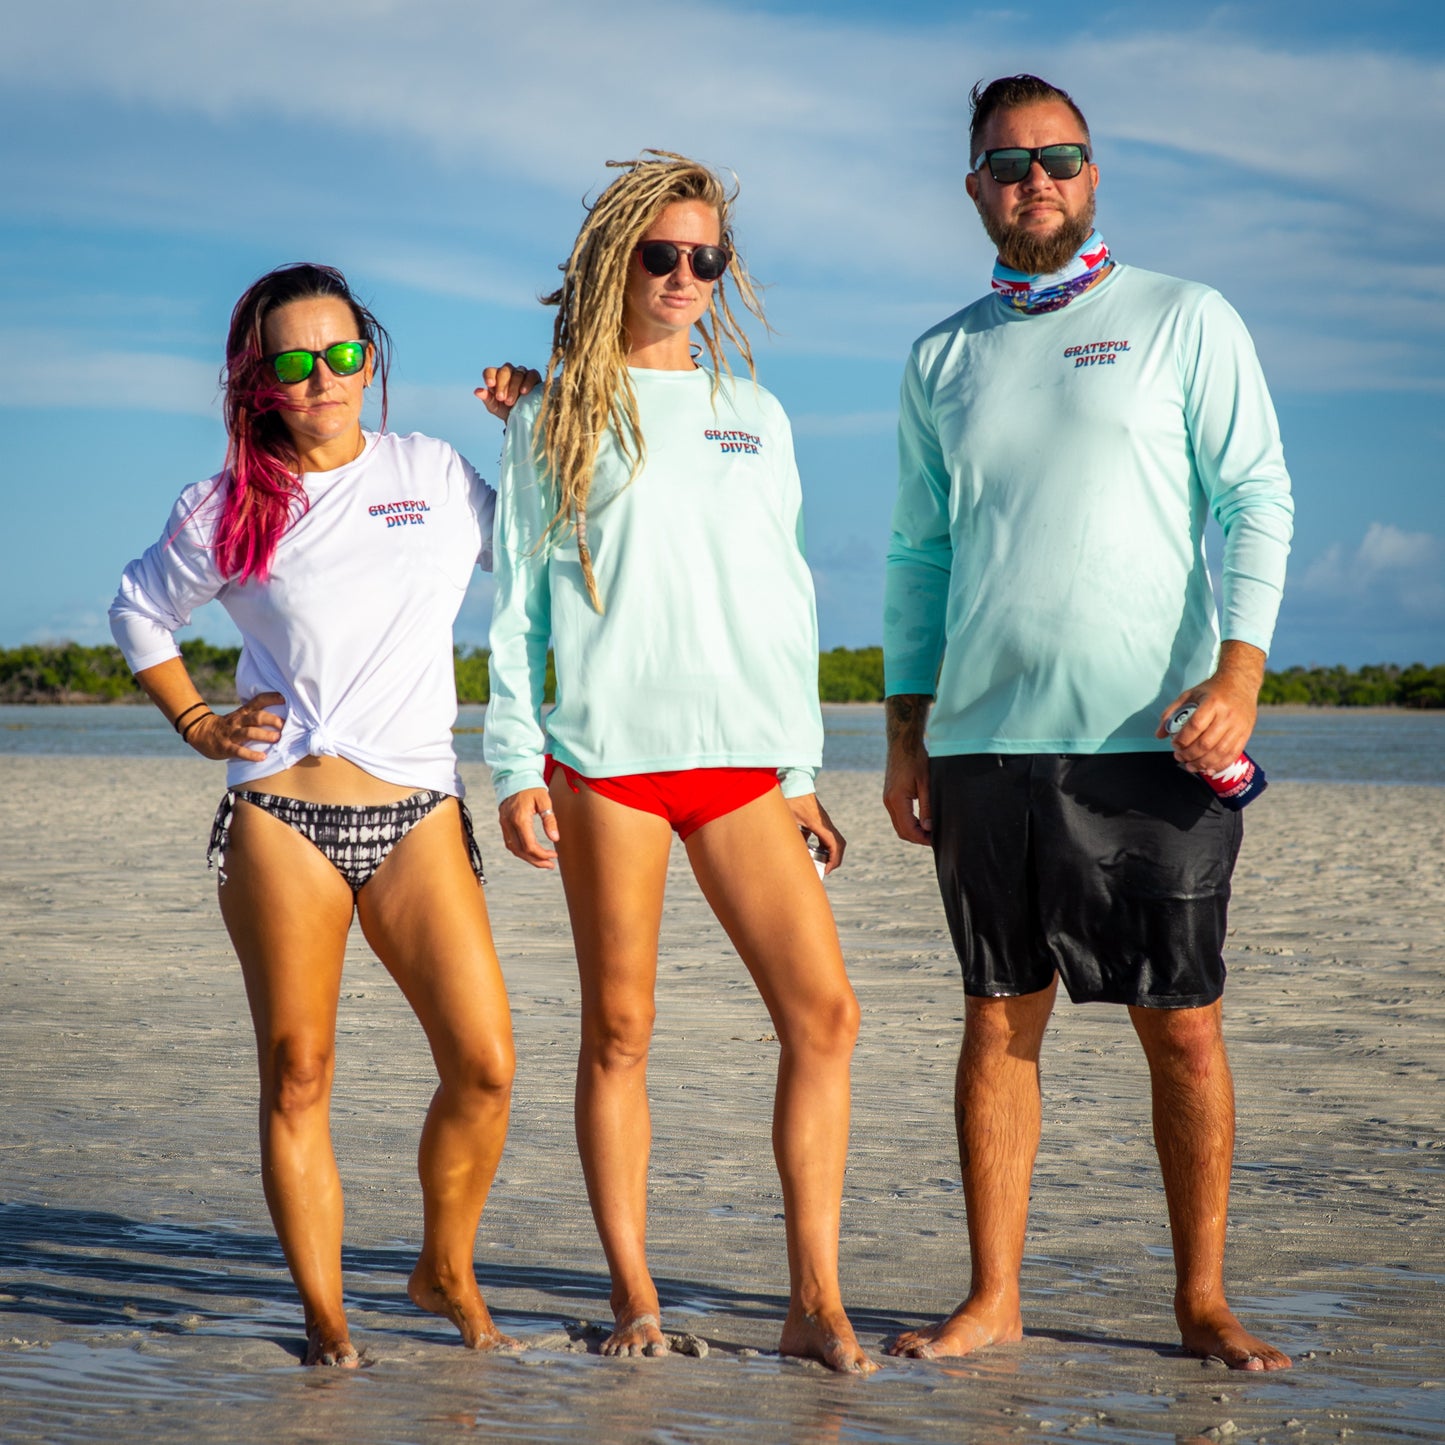 Grateful Diver Classic UV Shirt in white and seagrass on three models front shots on sandbar